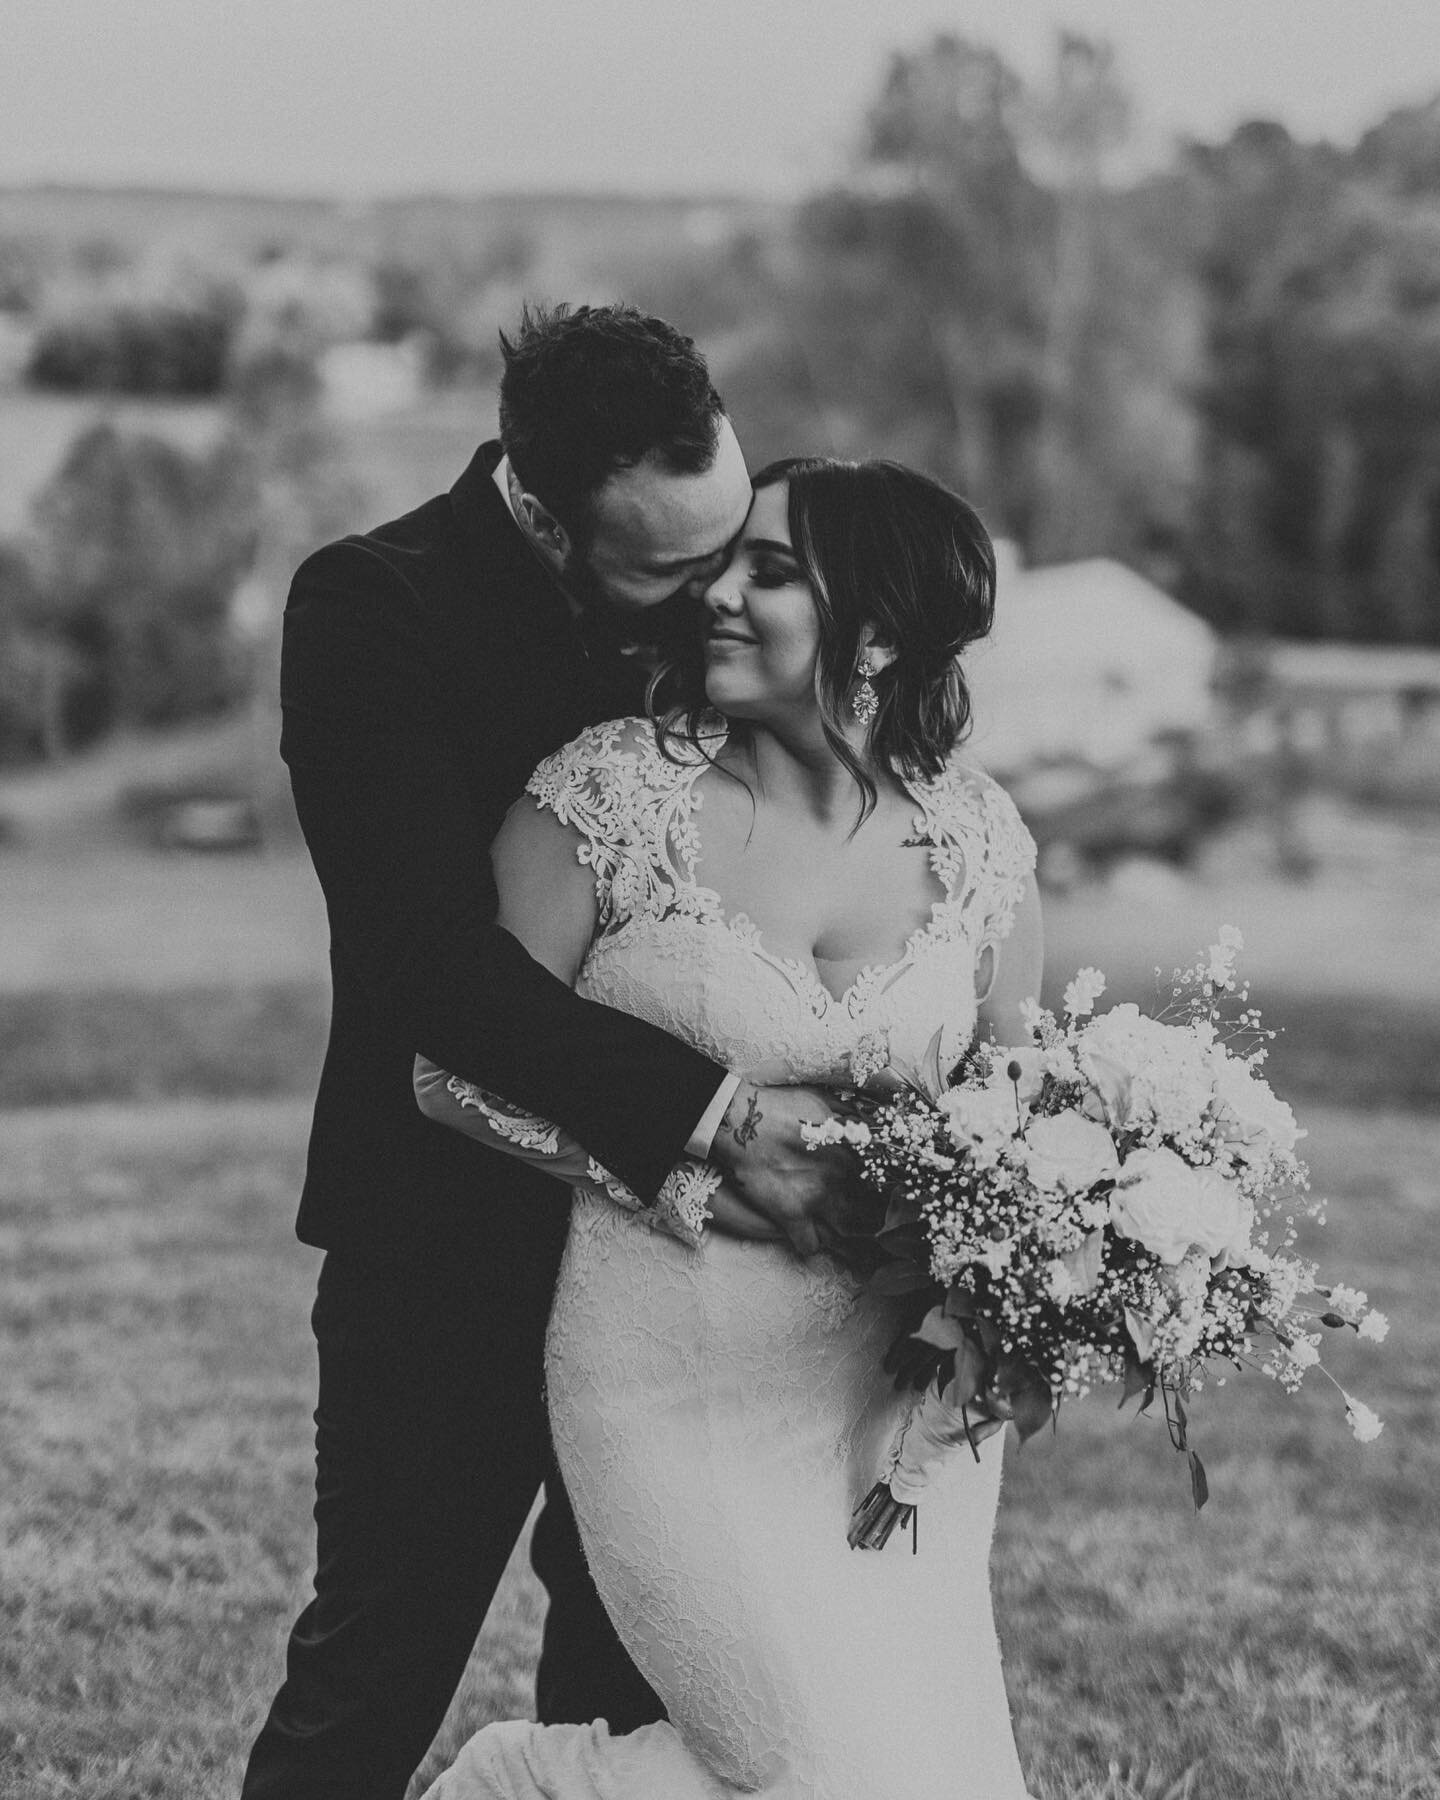 I always look back at our wedding photos and think about how lucky I am - I truly found my soulmate and best friend 🖤 I love you @drme7696 🖤